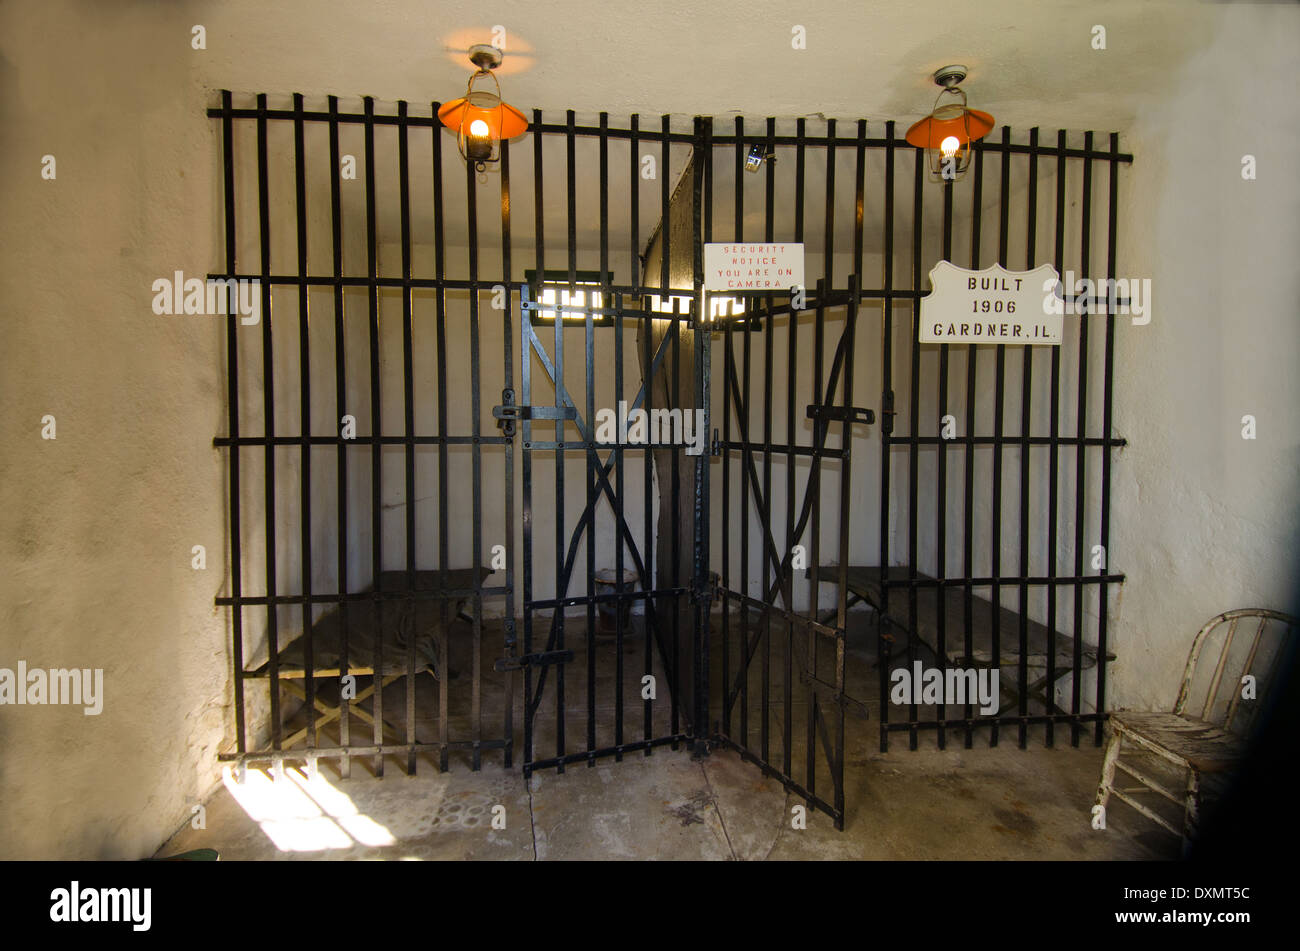 The cell in the Two-Cell Jail, built in 1906, a popular attraction in Gardner, Illinois, a town along Route 66. Stock Photo